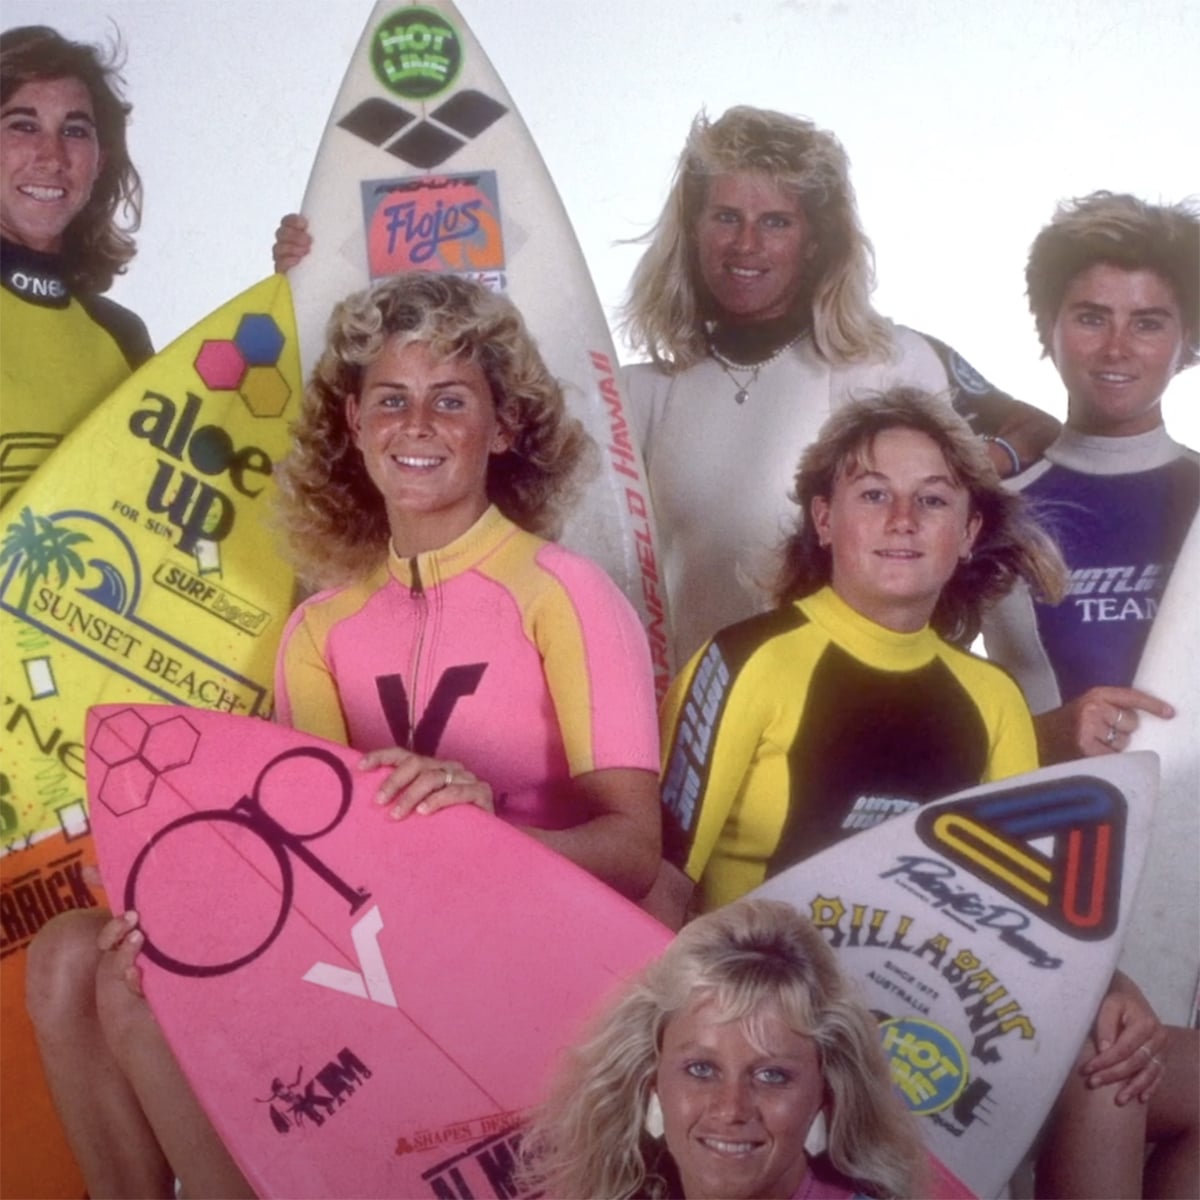 Girls Can’t Surf: The Untold Story - SurfGirl Magazine